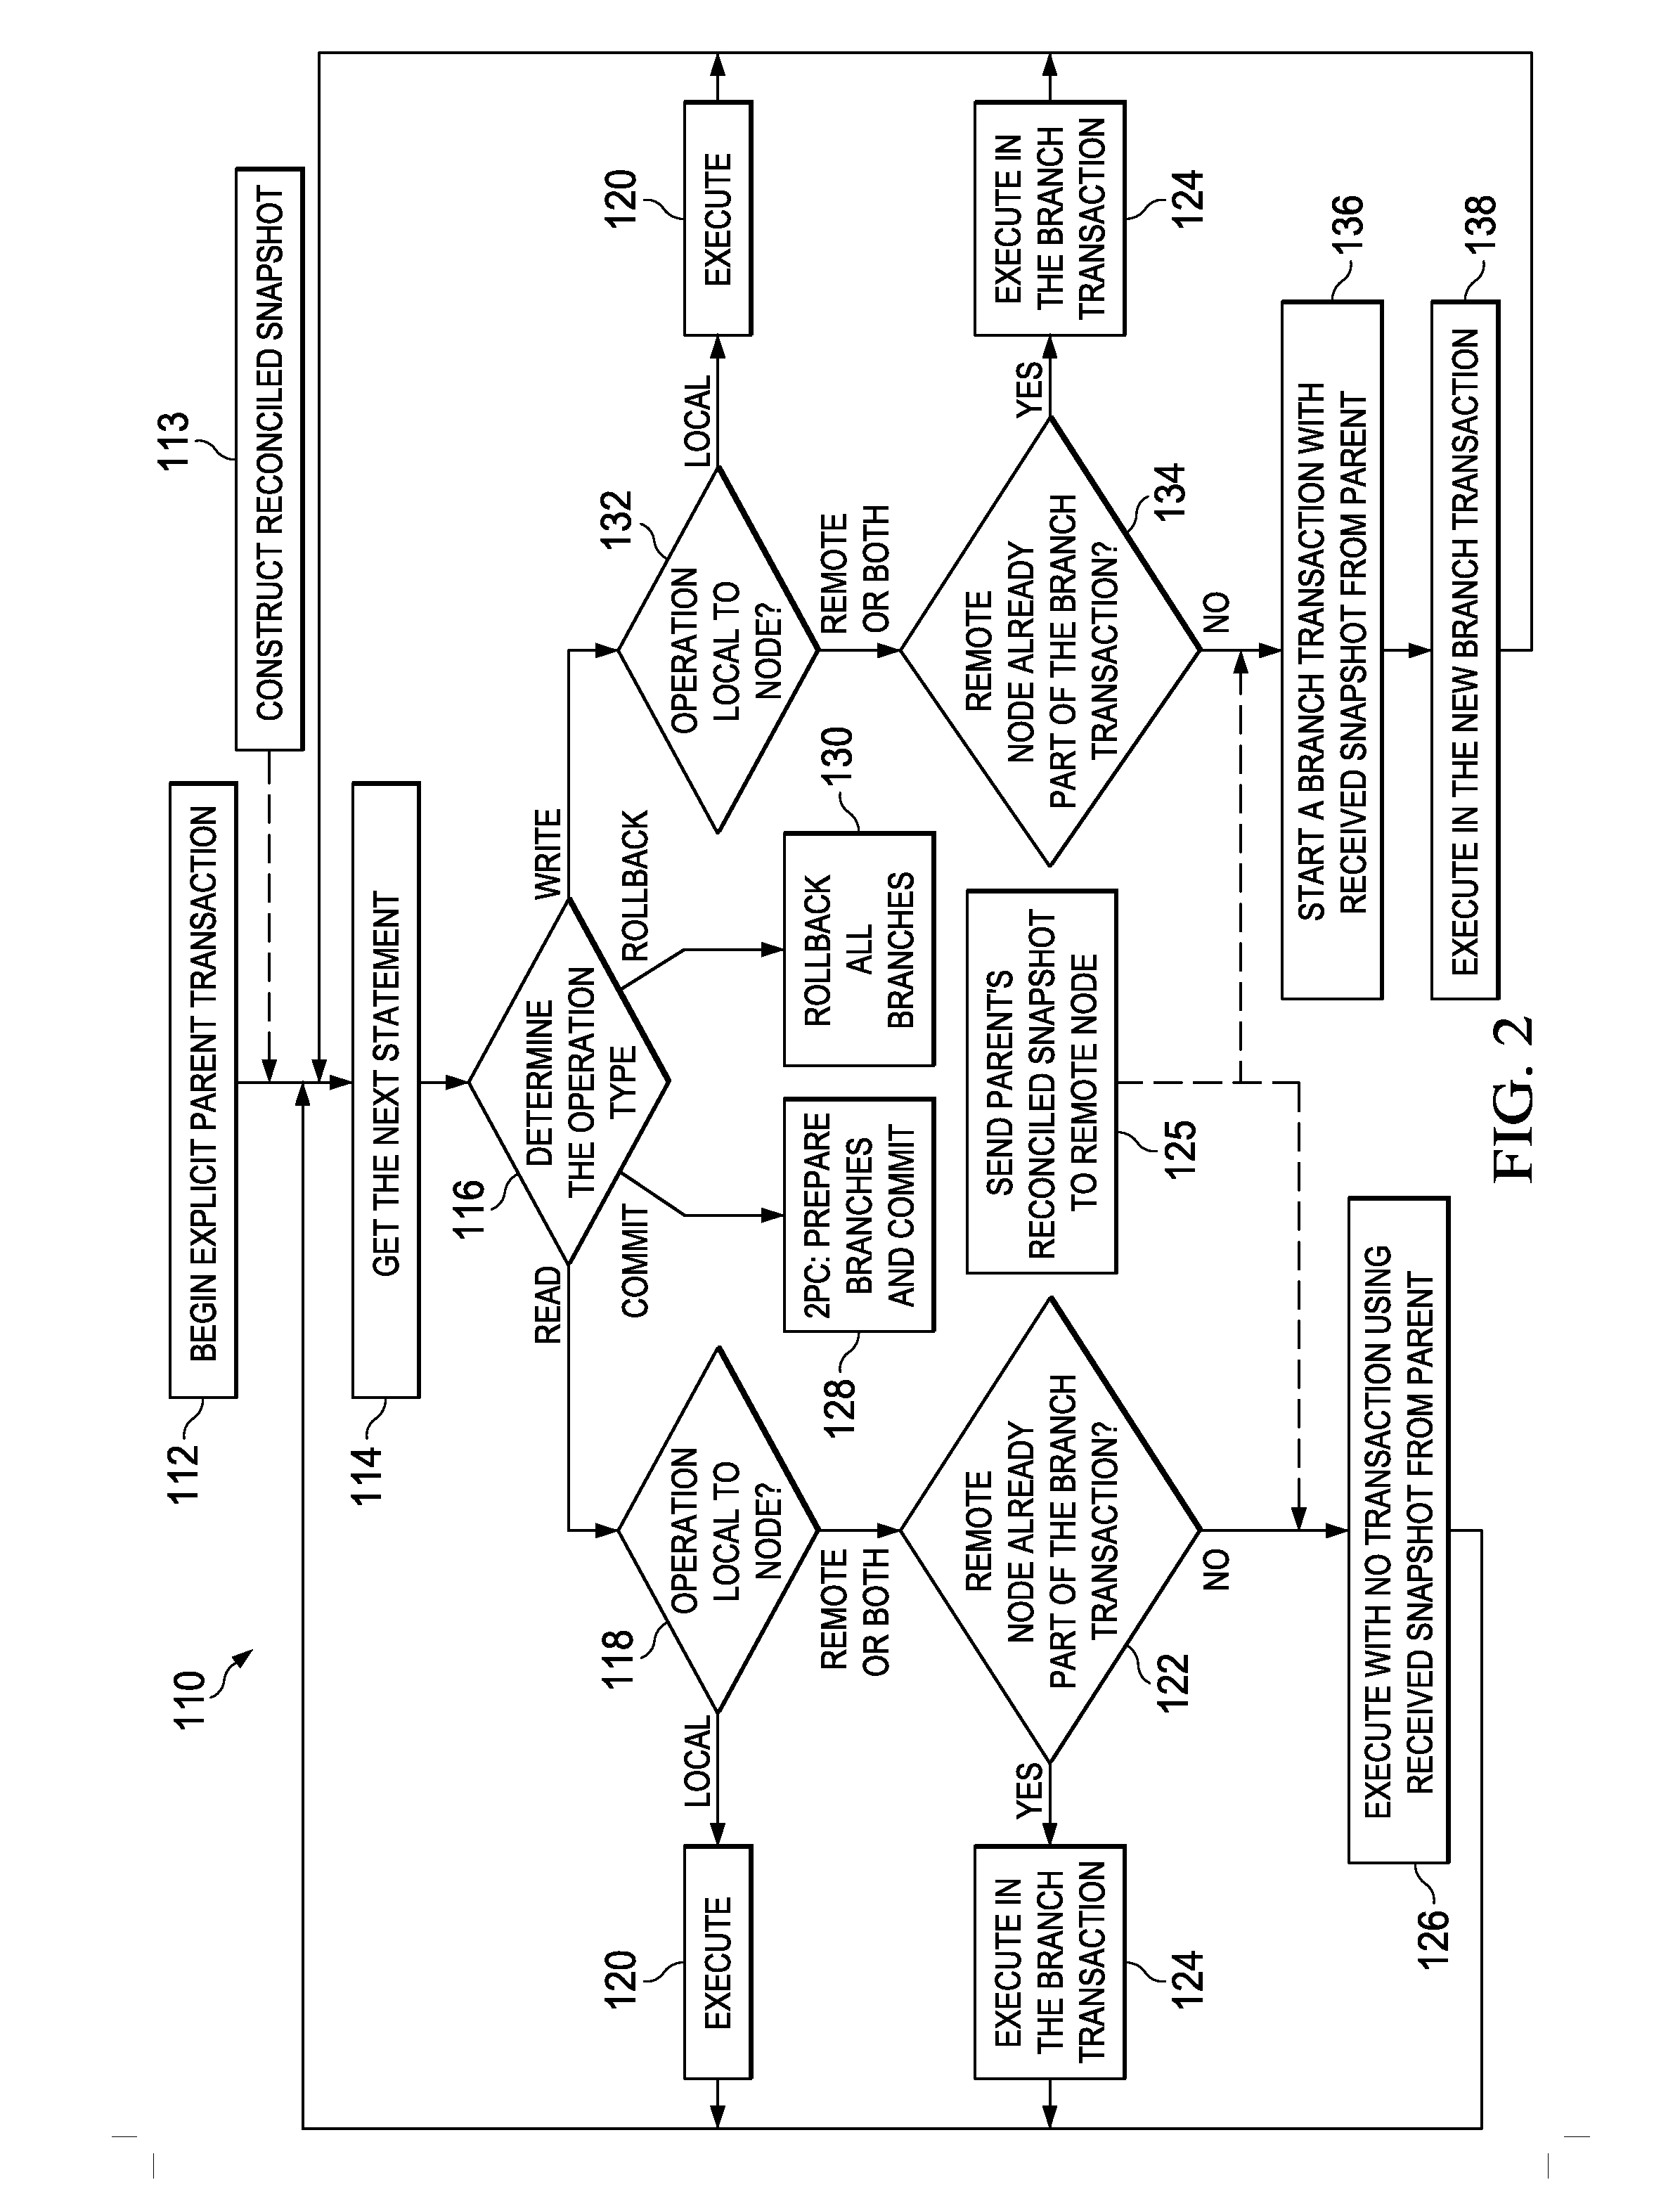 System and Method for Creating a Distributed Transaction Manager Supporting Repeatable Read Isolation level in a MPP Database